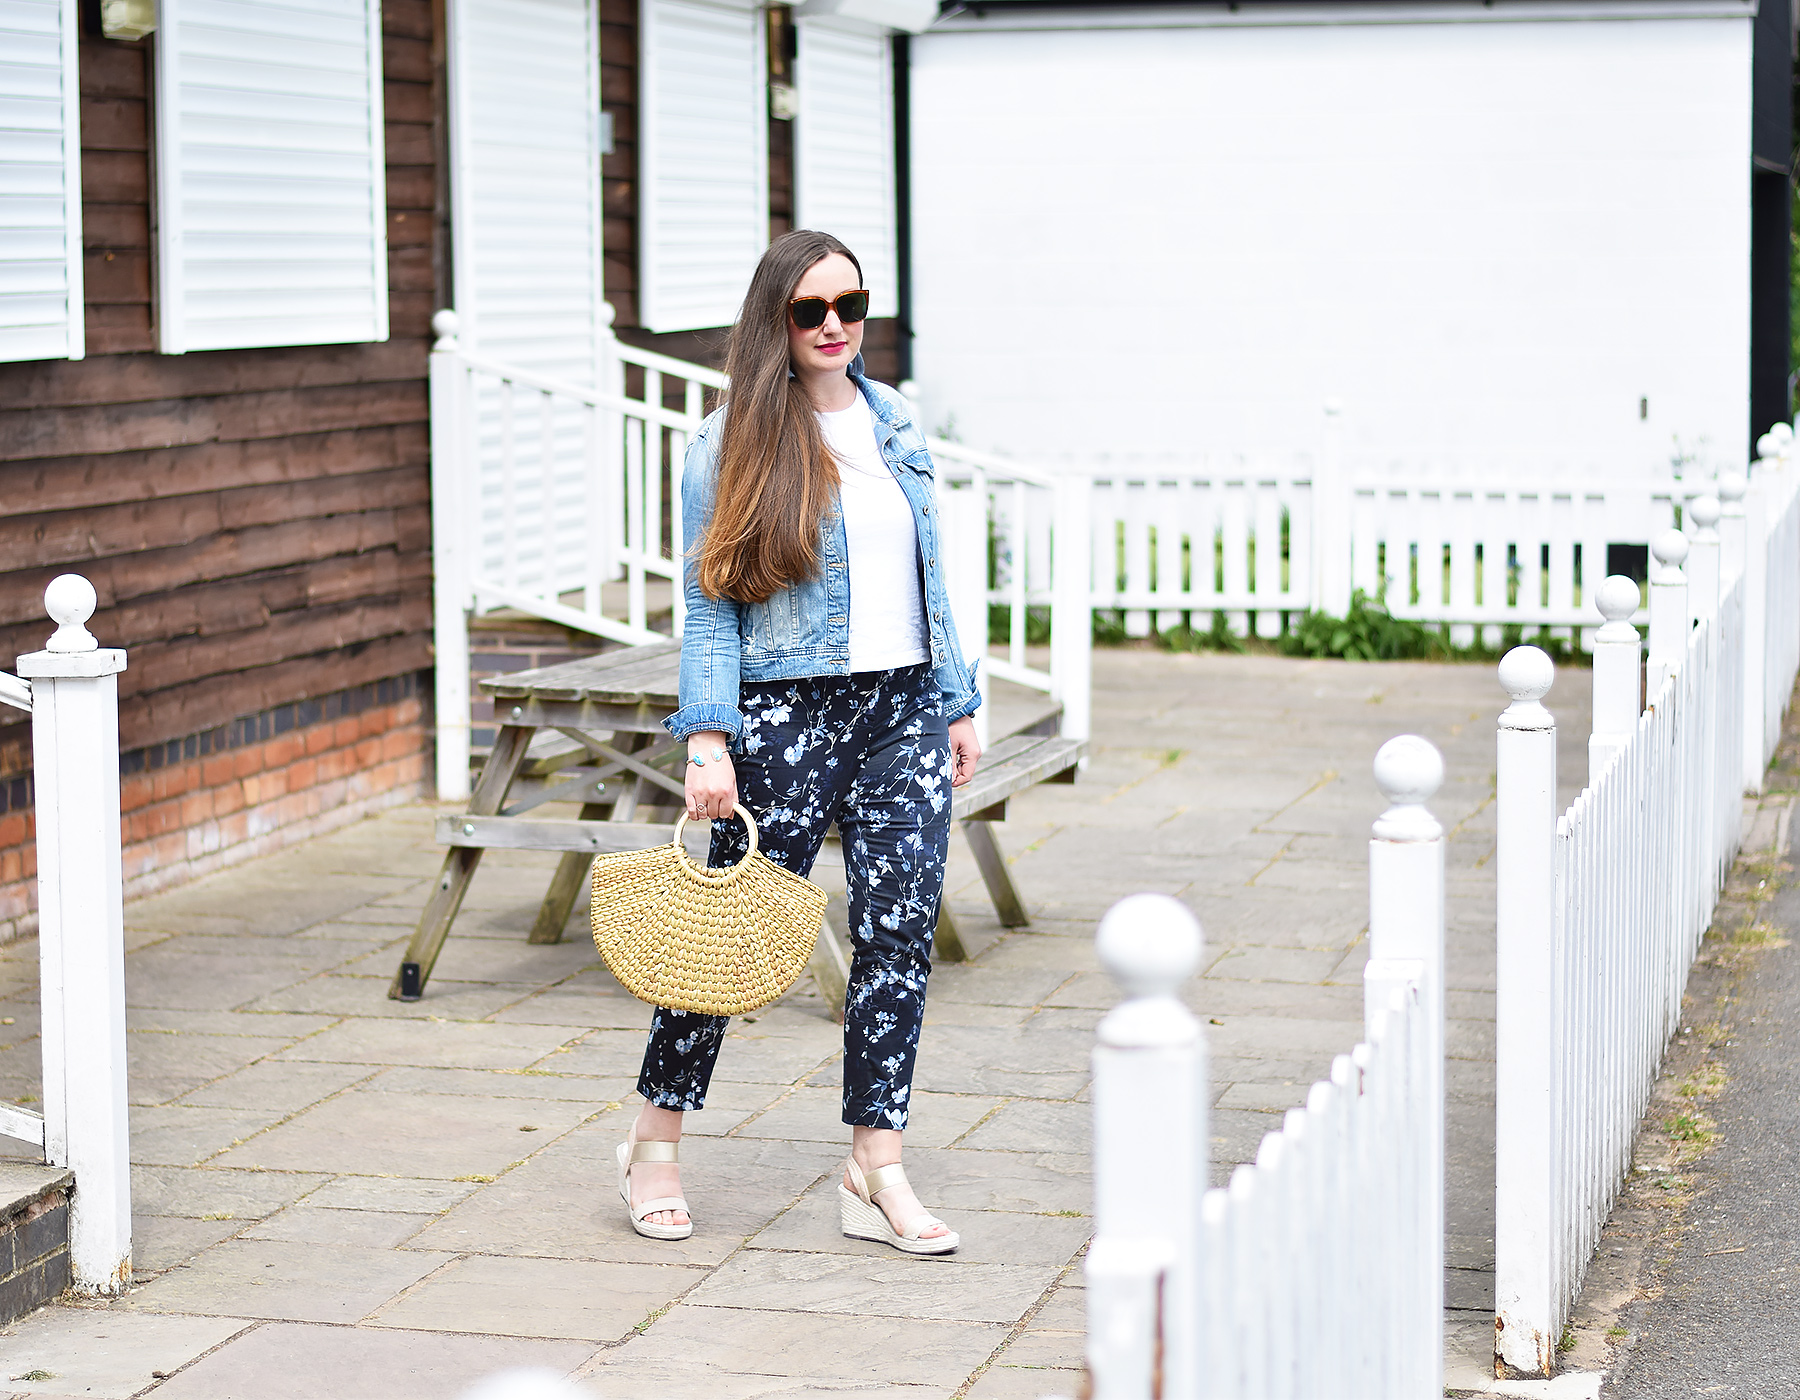 Floral Trousers and Wedge Sandals Outfit